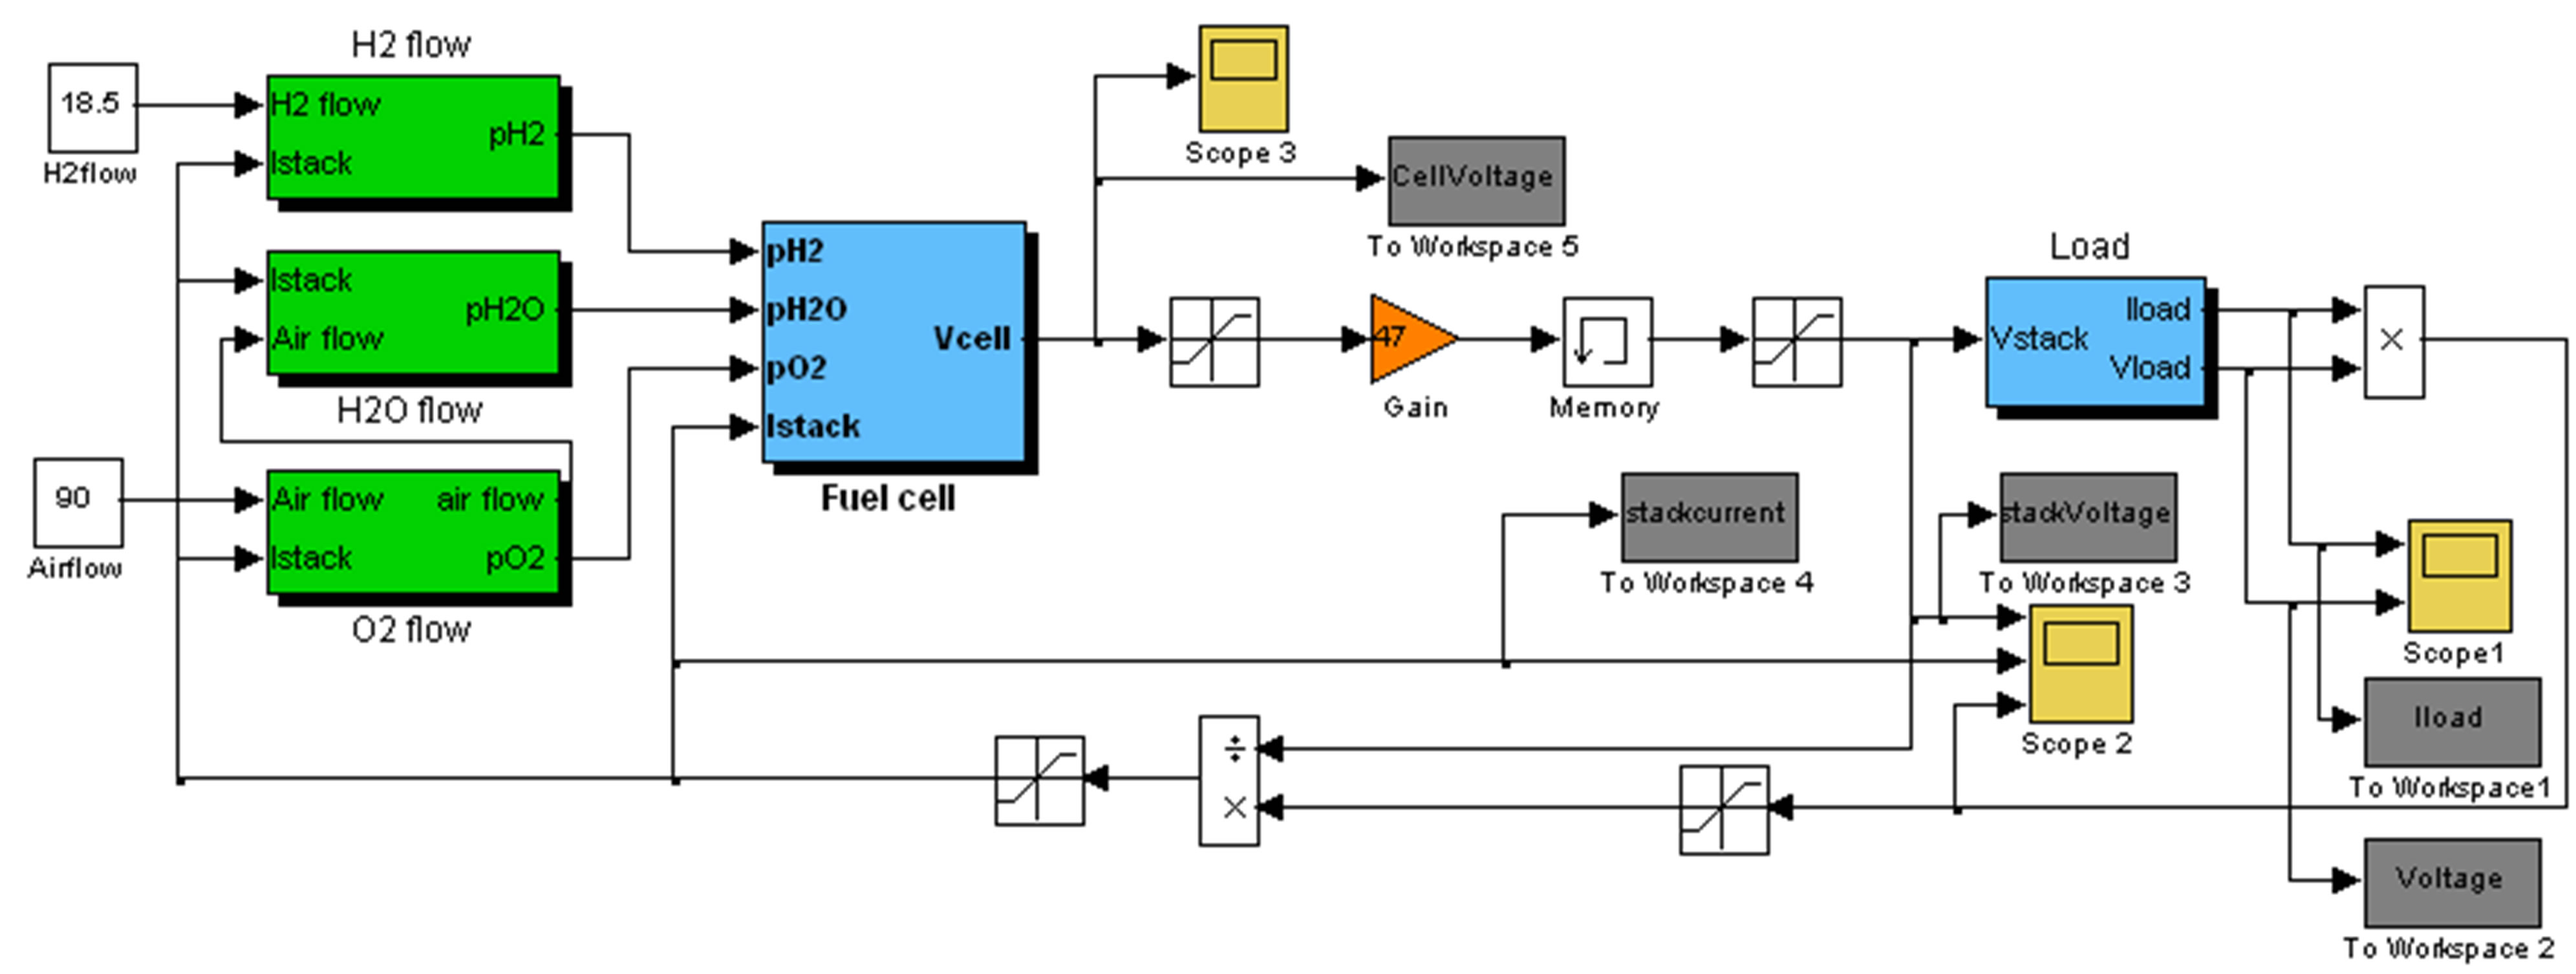 Pem fuel cell thesis